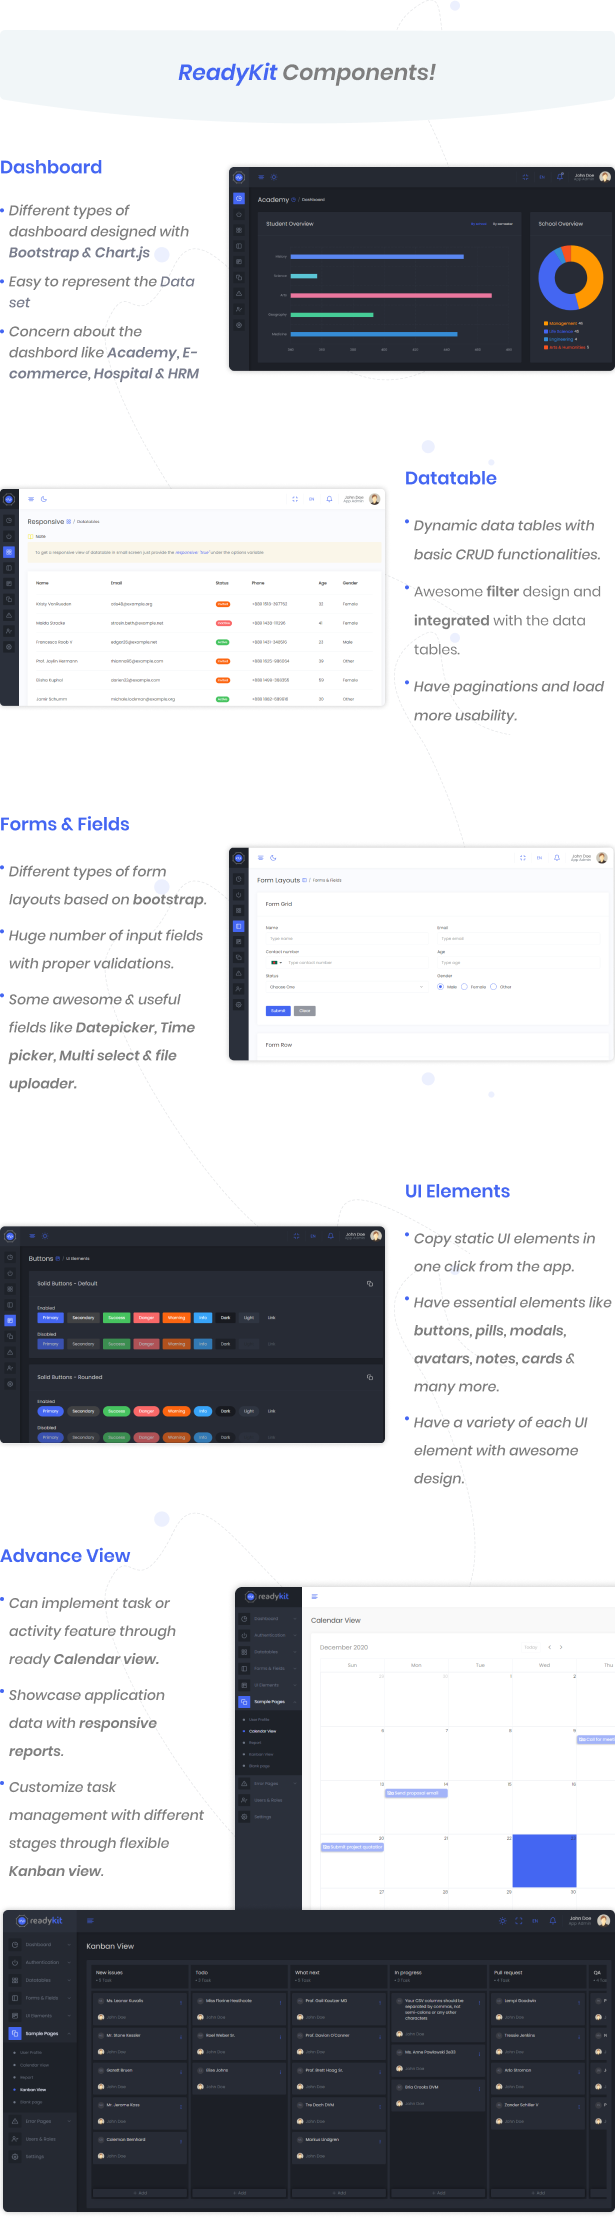 ReadyKit -  Admin & User Dashboard Templates (with functionality) for Laravel + Vue App Development - 5